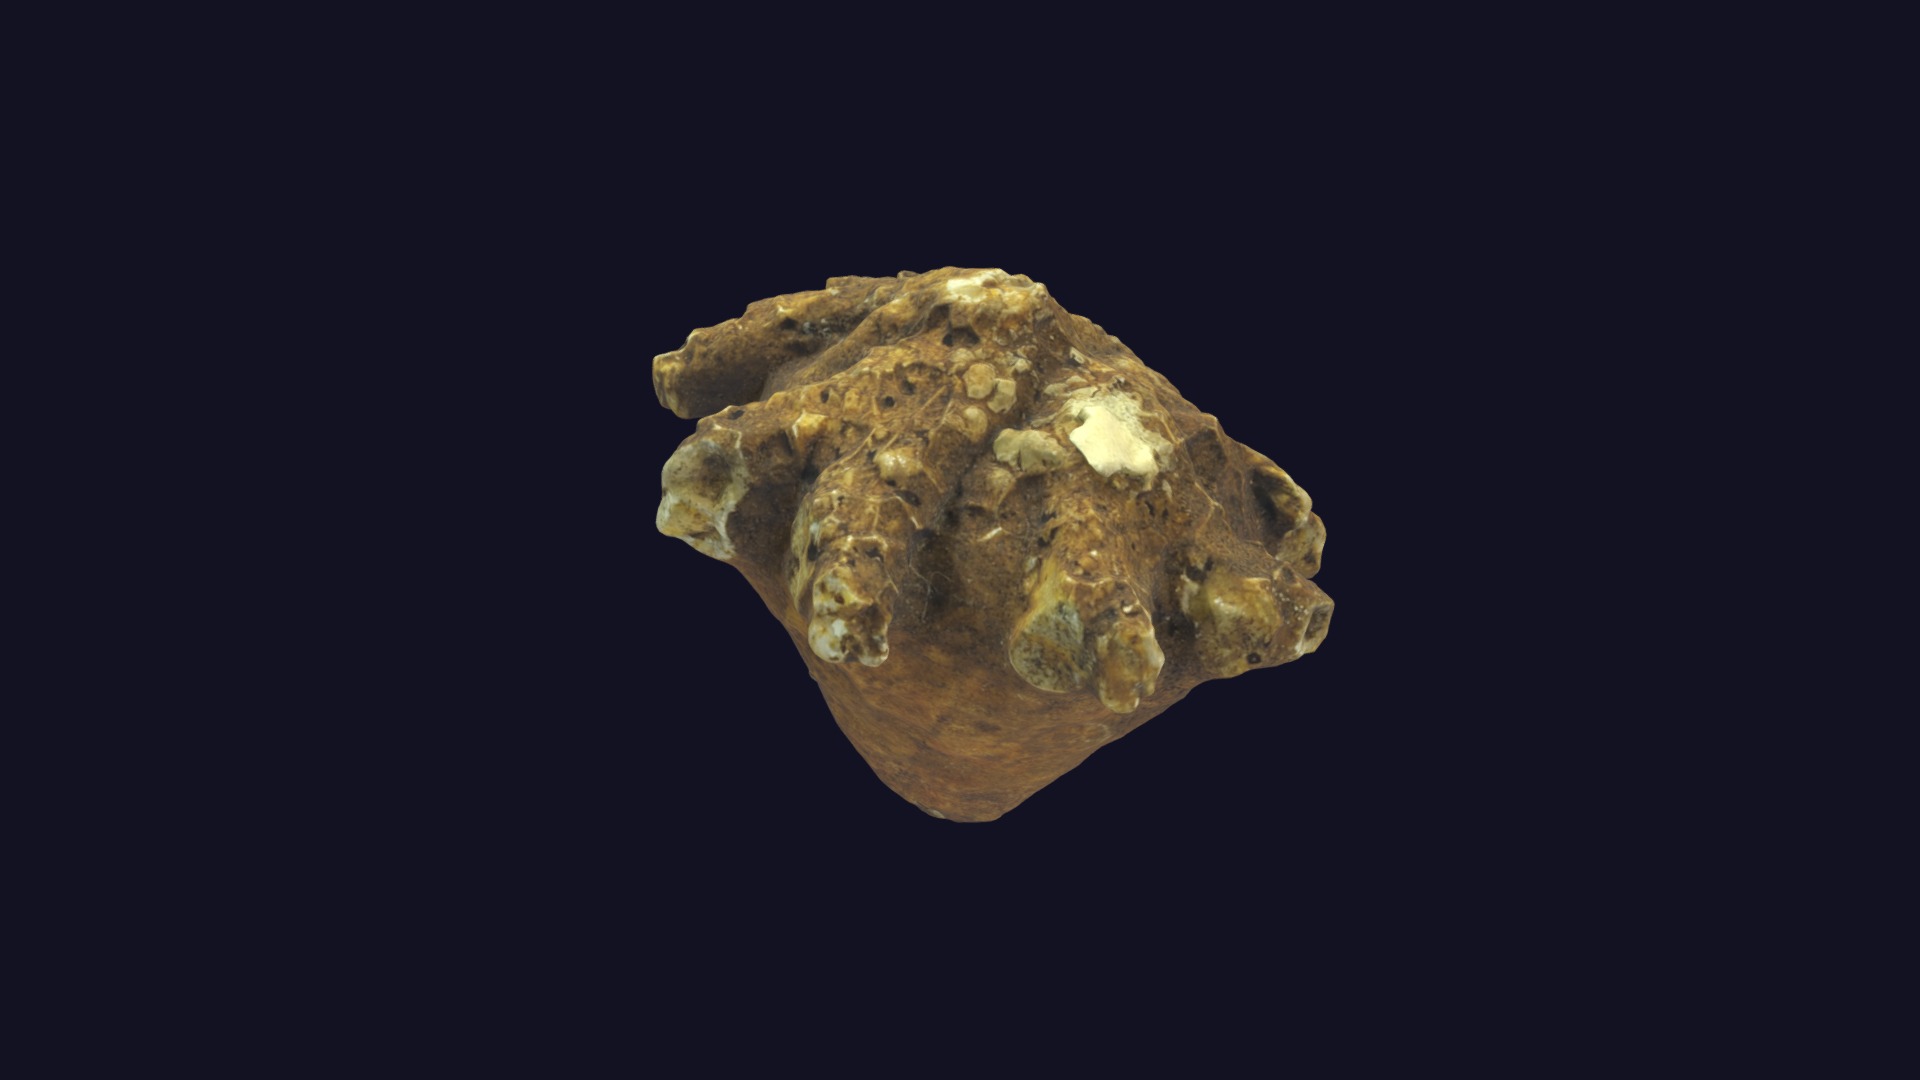 3D model Cactocrinus glans - This is a 3D model of the Cactocrinus glans. The 3D model is about a rock with a dark background.